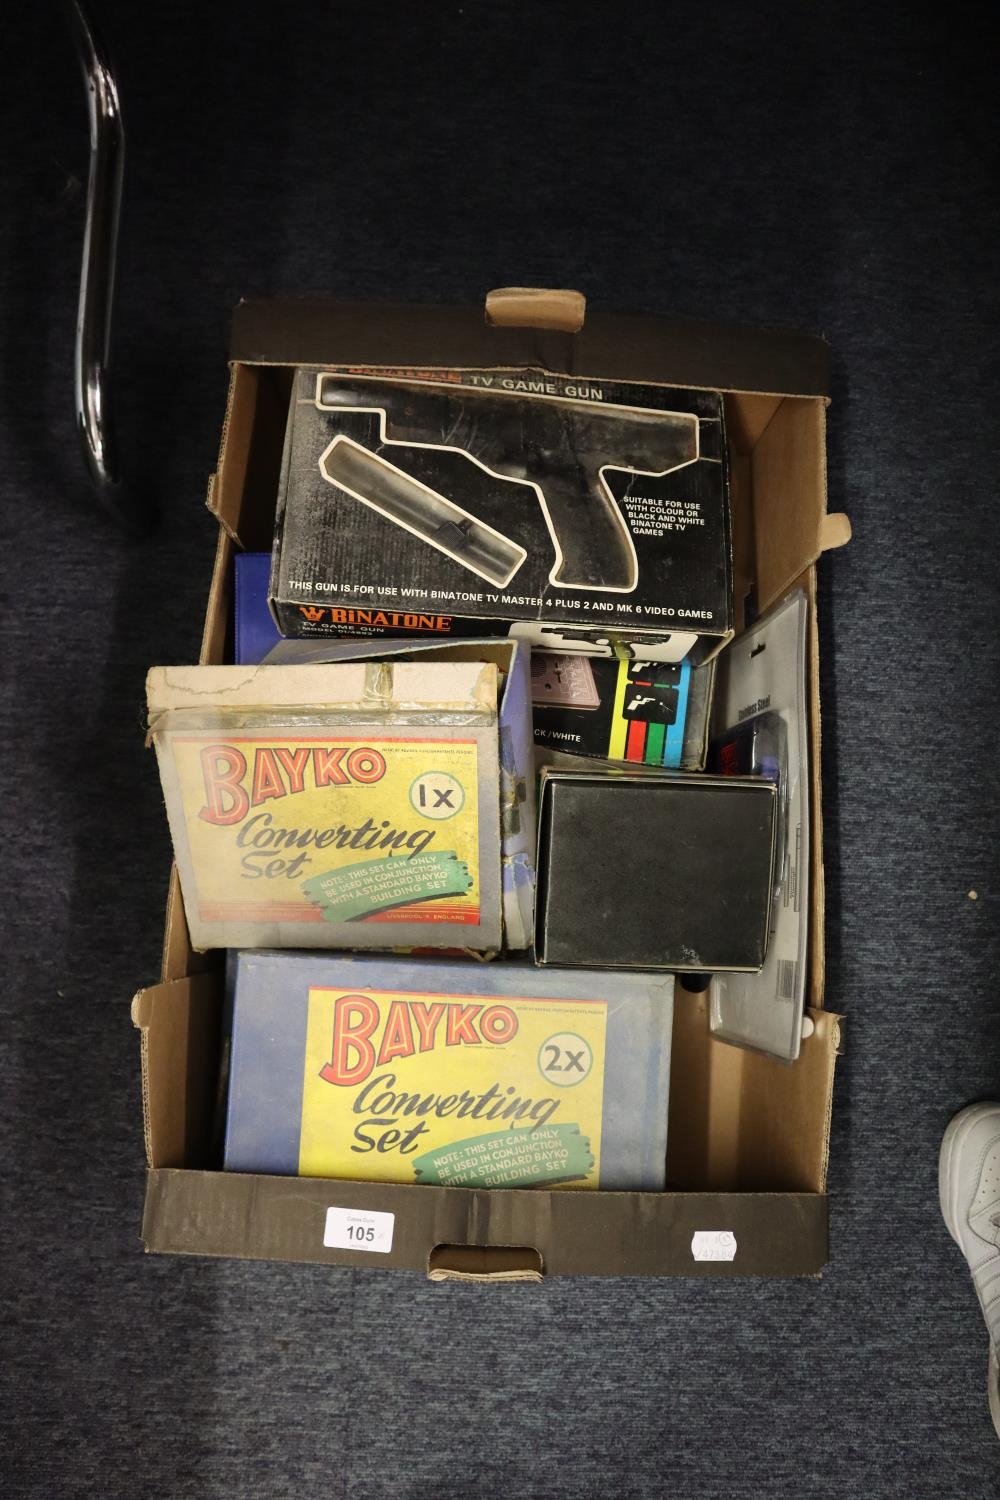 BOXED BAYKO BUILDING SET, ALSO BOXED CONVERTING SETS 1x AND 2x AND A BINATONE TV GAME WITH TV GAME